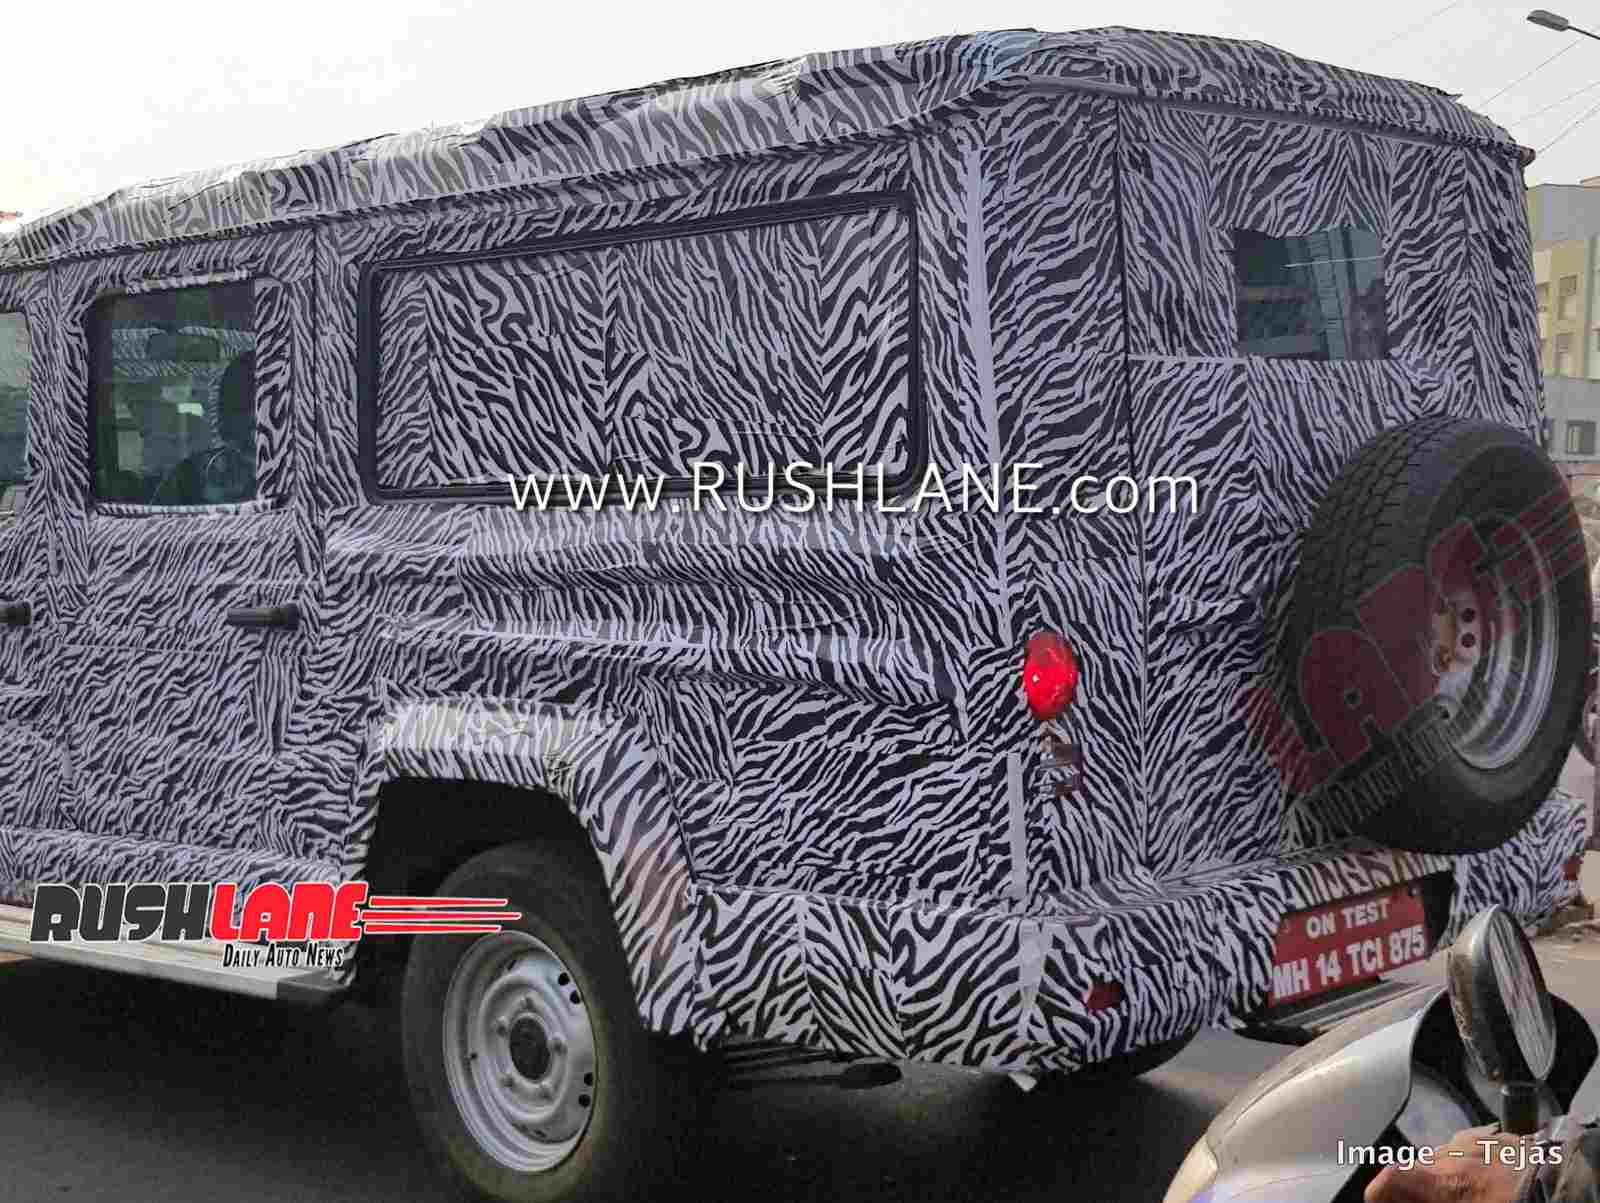 2020 Force Trax Bs6 And Gurkha Suv Spied Gets Led Drls